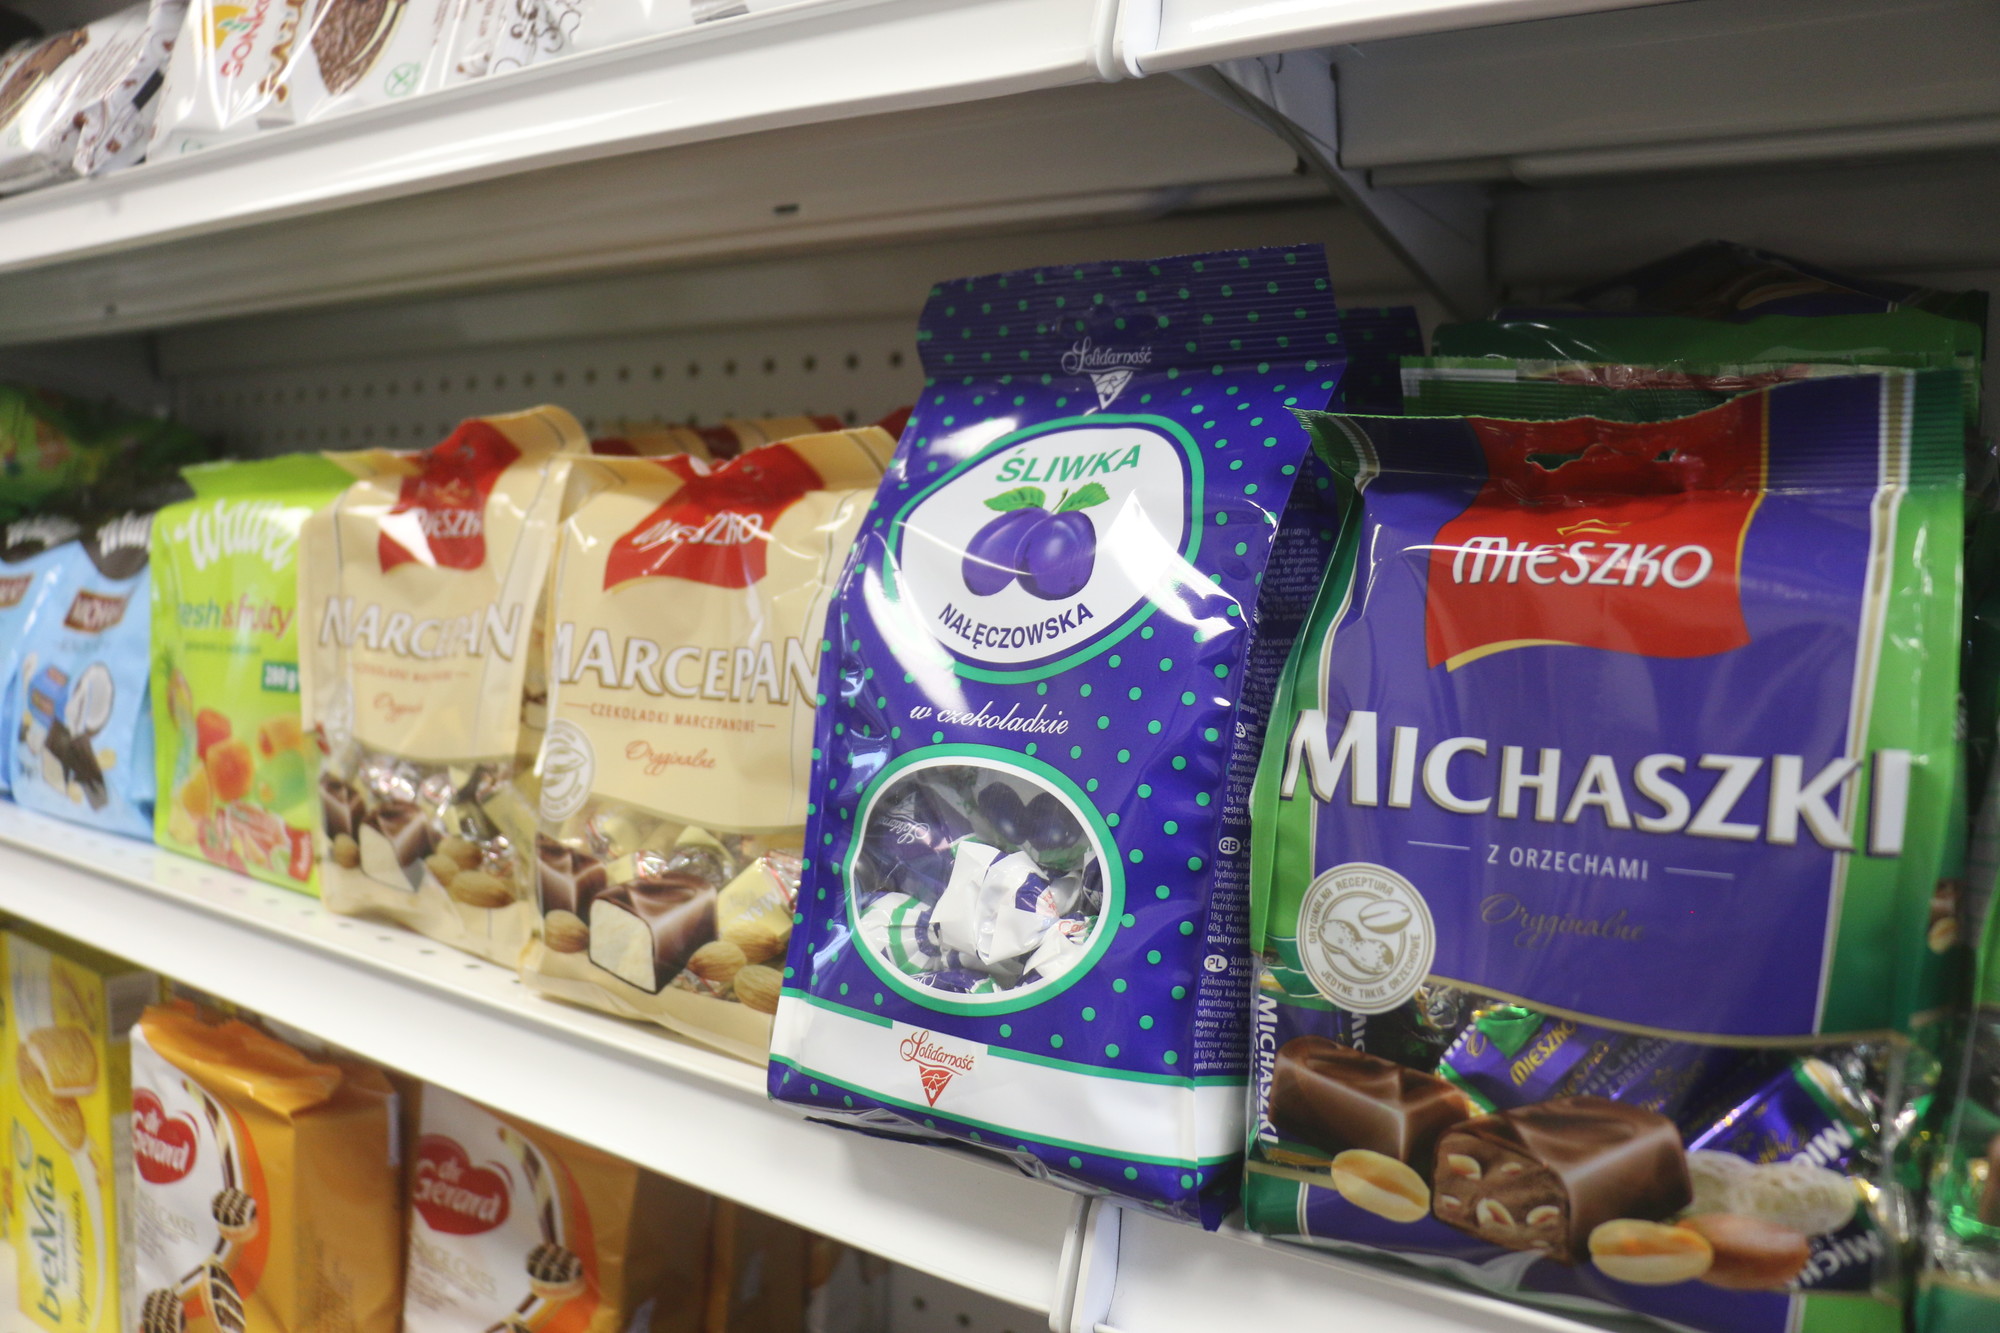 Polish chocolate is better than American, the store’s owner insists.